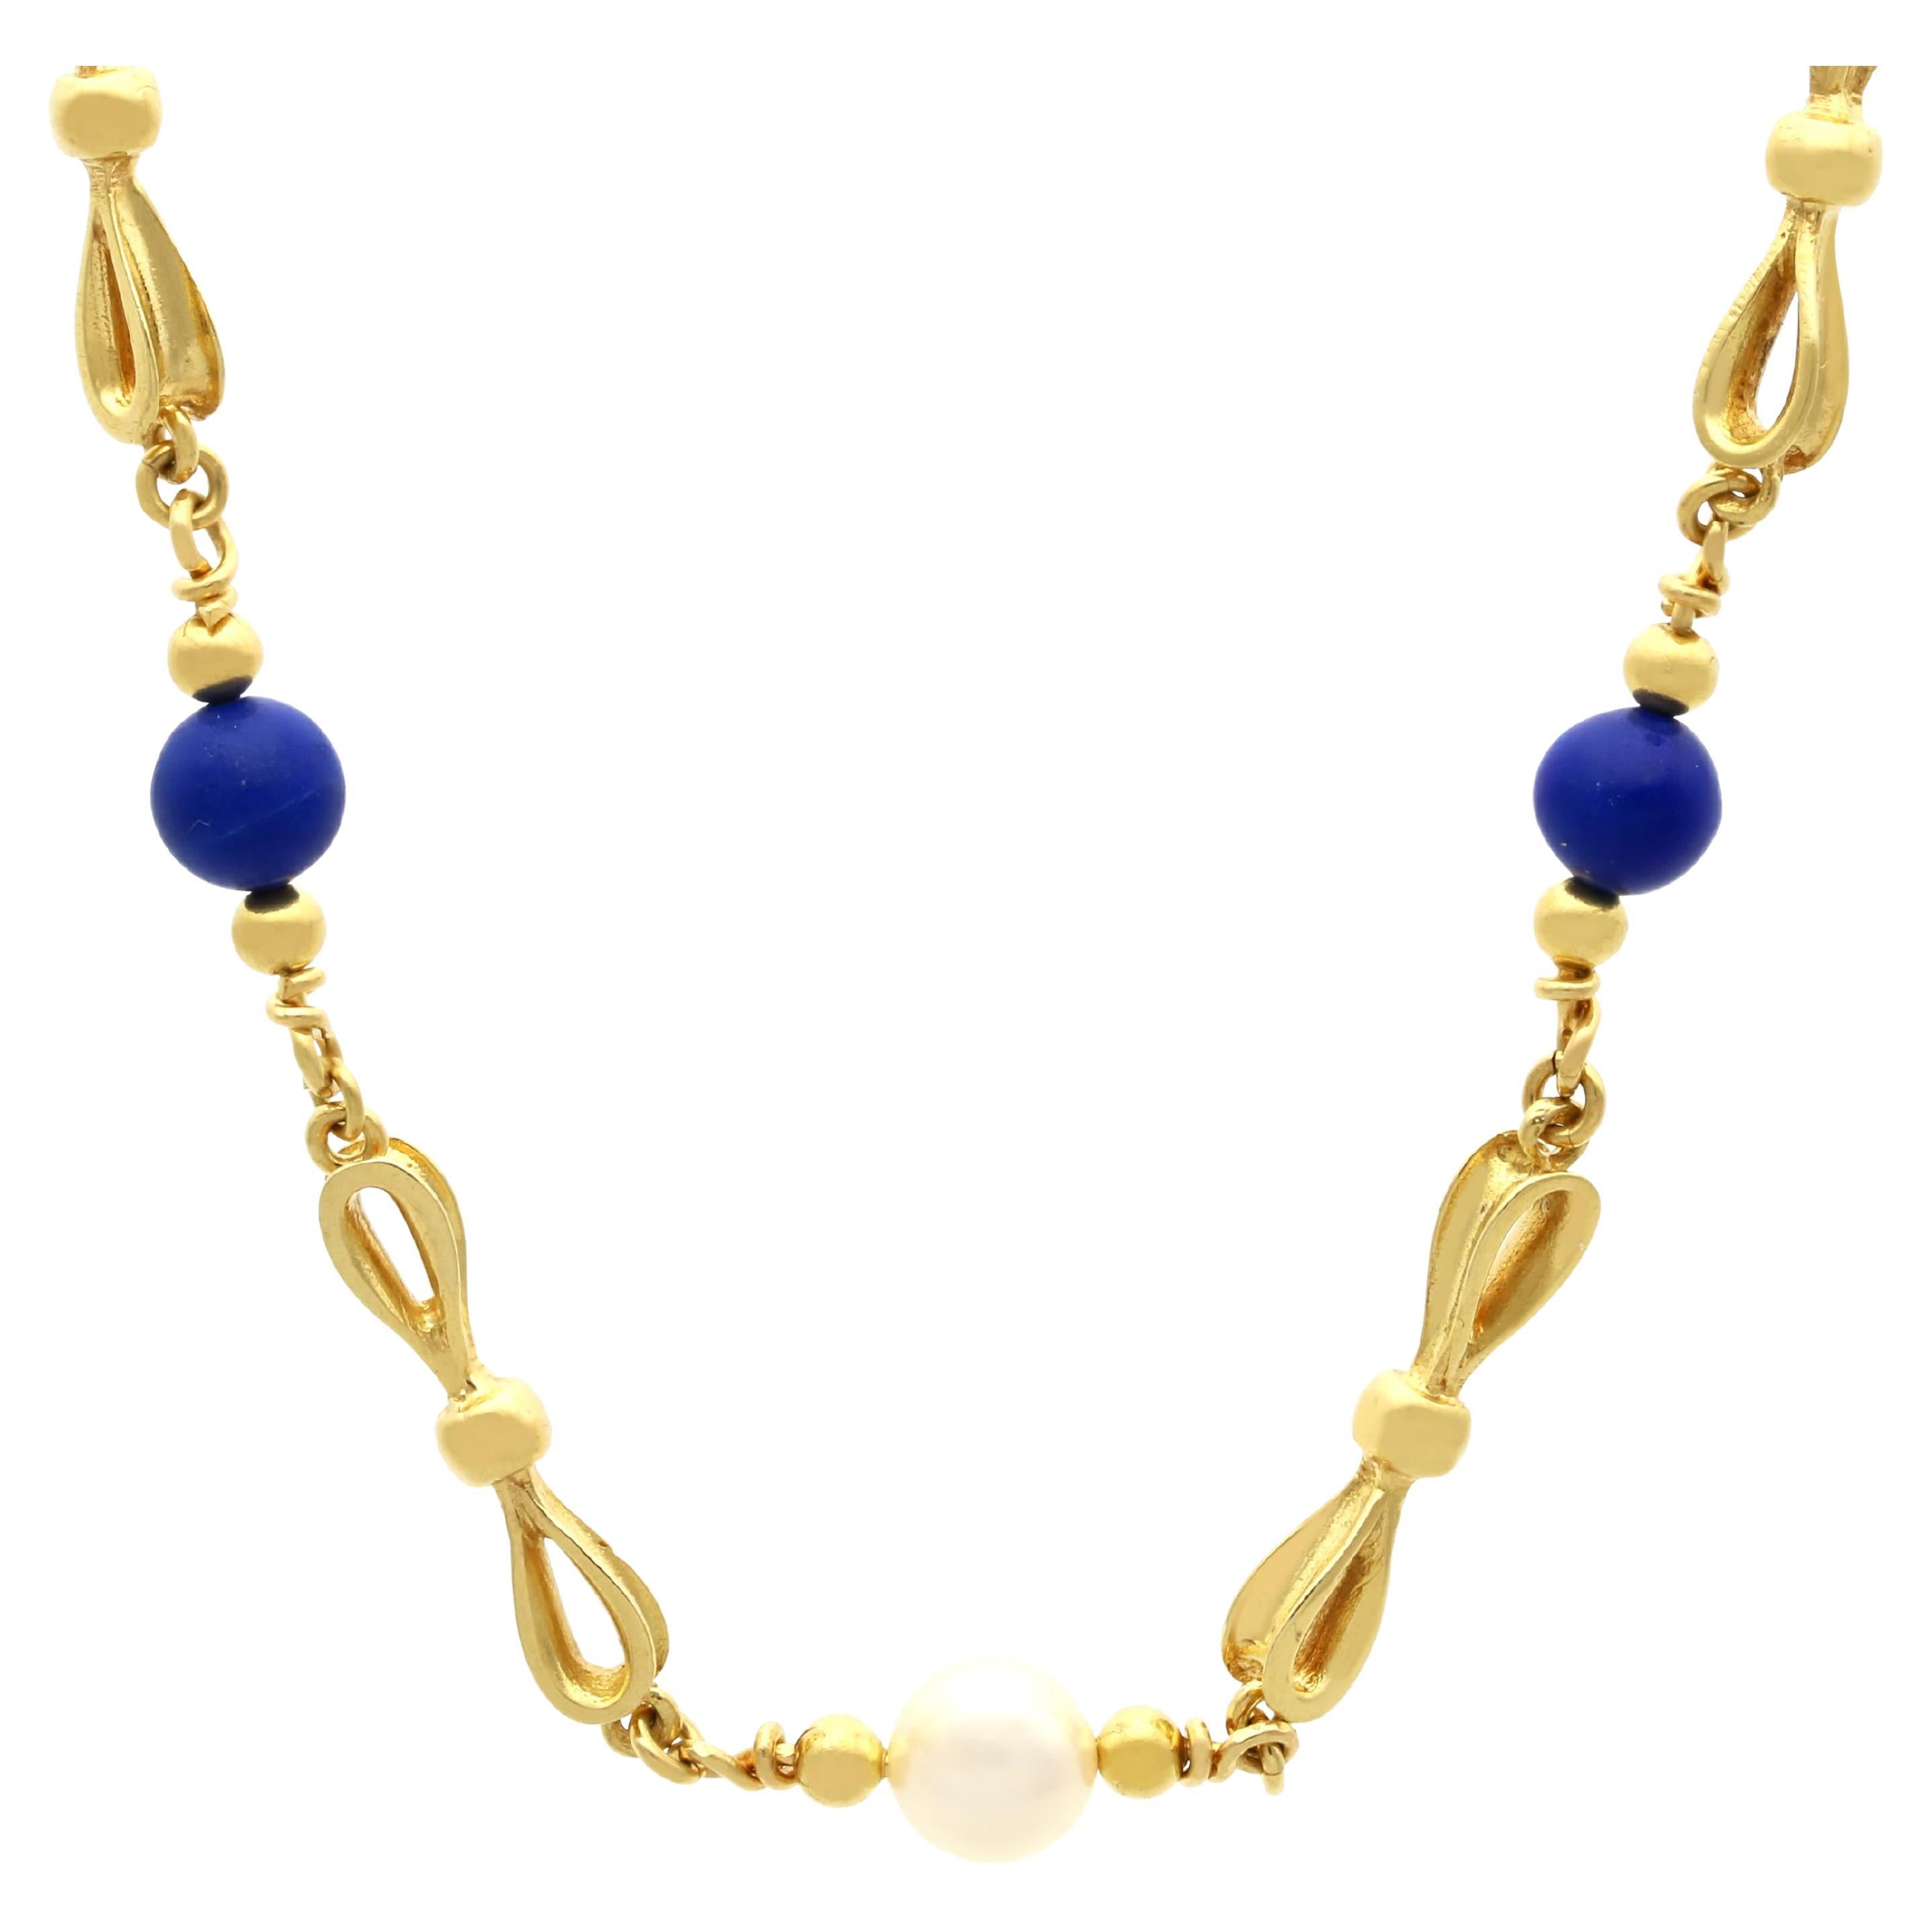 Vintage 7.80 Carat Lapis Lazuli  Pearl Chain Necklace in 18k Yellow Gold